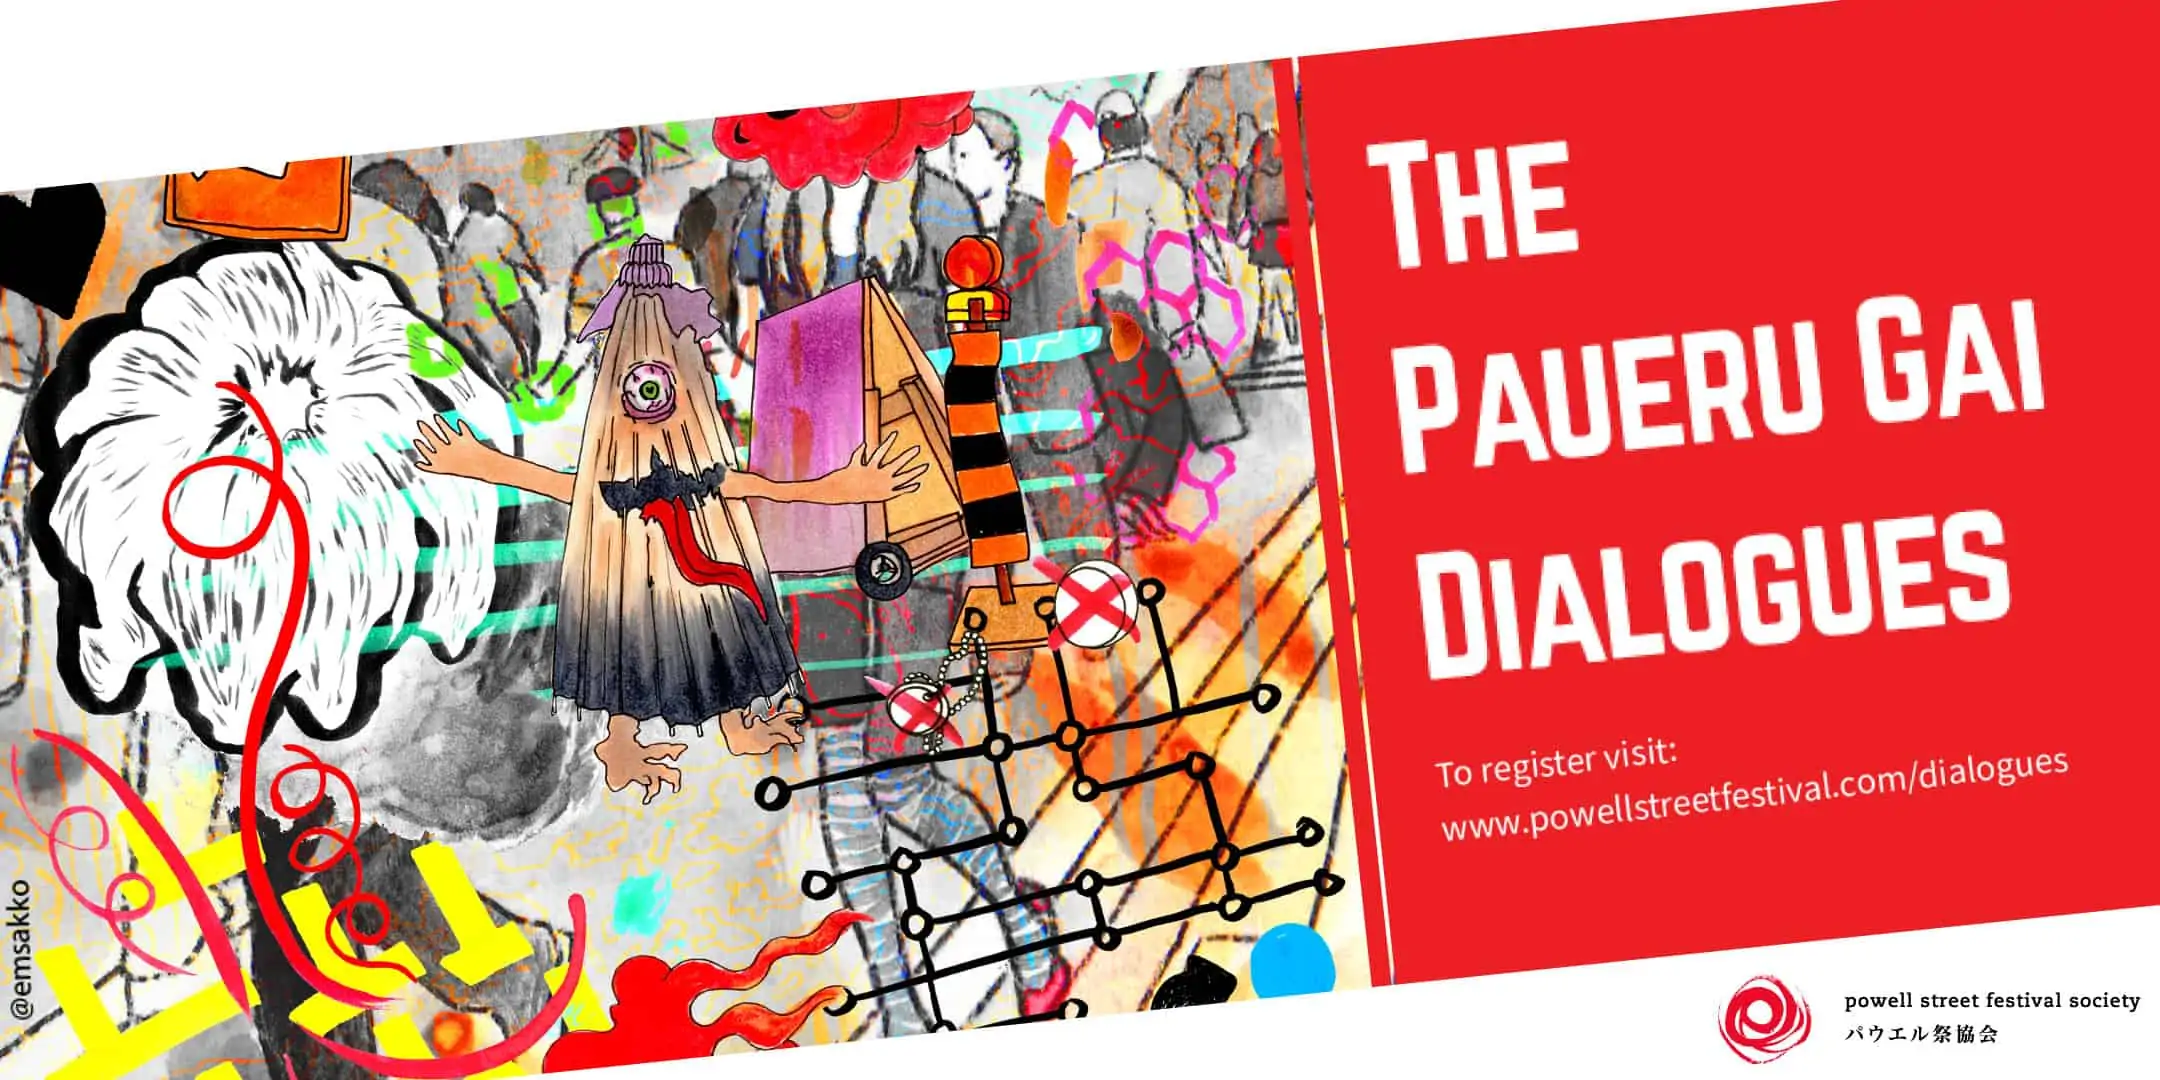 Banner with text that reads "The Paueru Gai Dialogues. To register, visit www.powellstreetfestival.com."